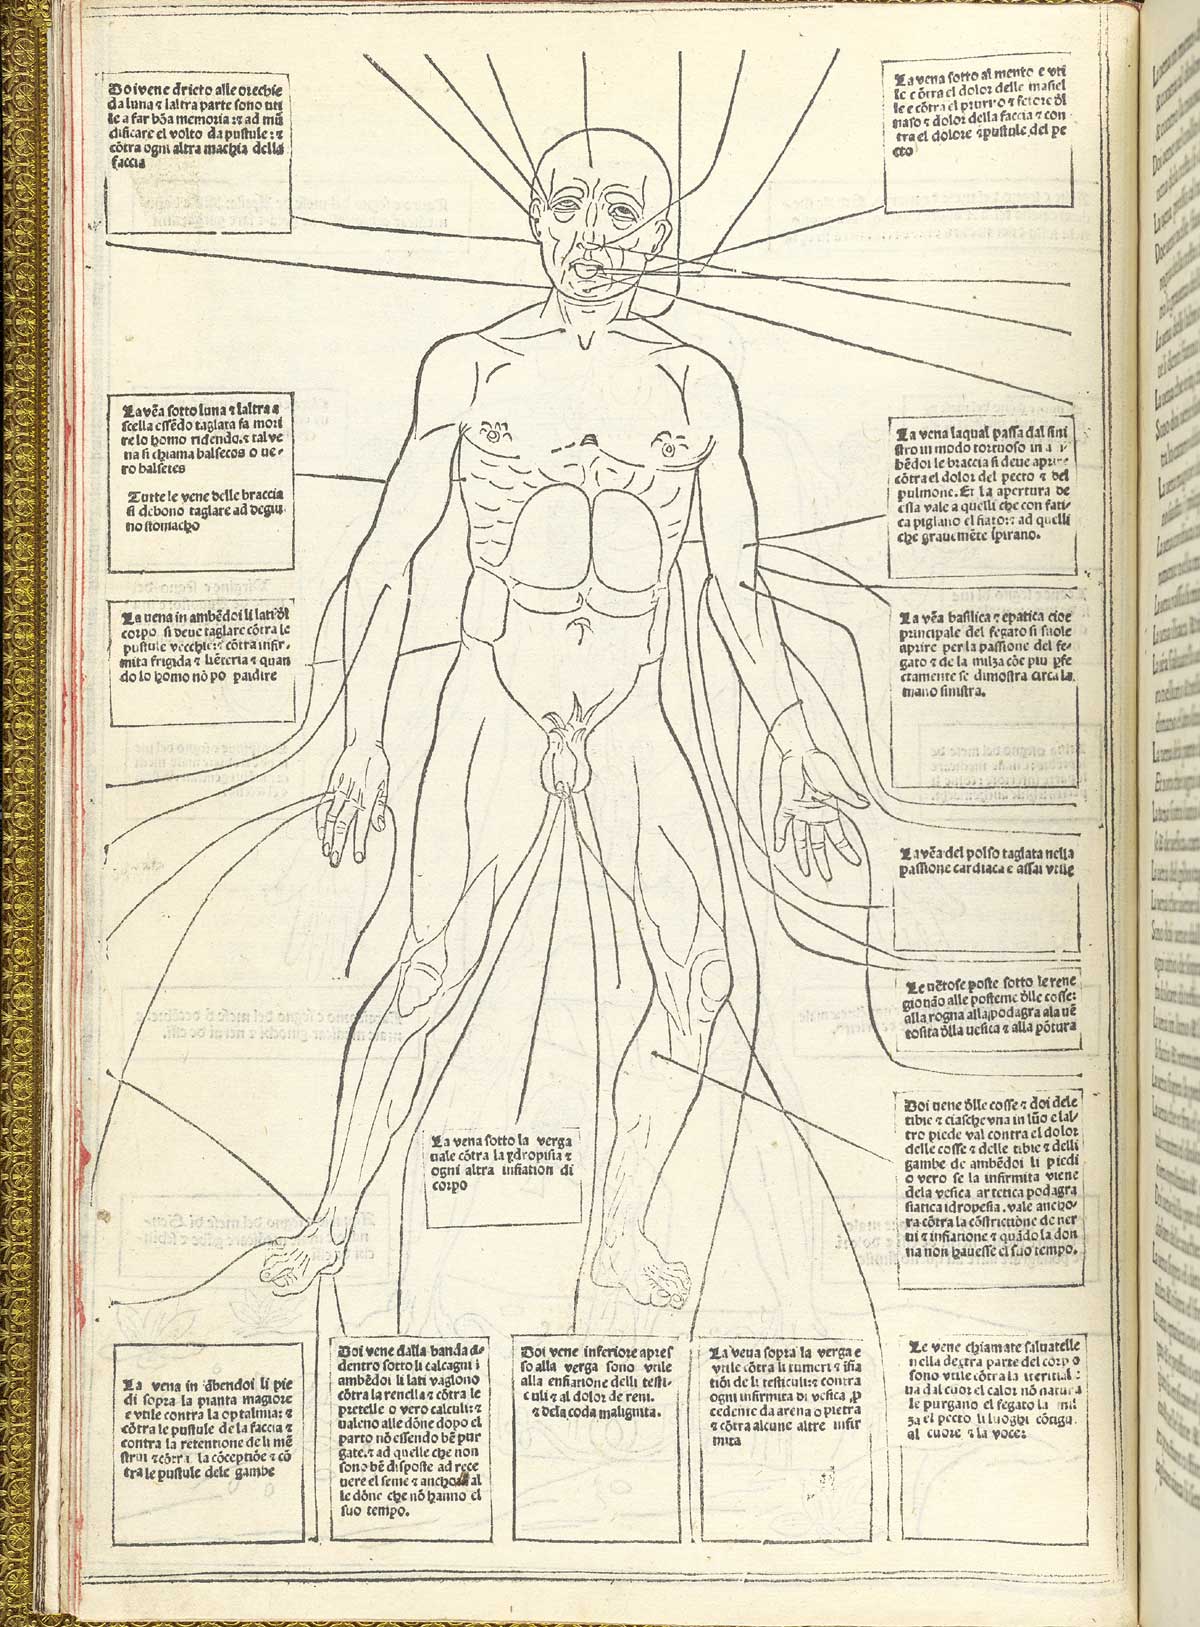 Page 16 of Johannes de Ketham's Fasiculo de medicina, featuring bloodletting man, detailing a map of the veins to be incised for bloodletting.